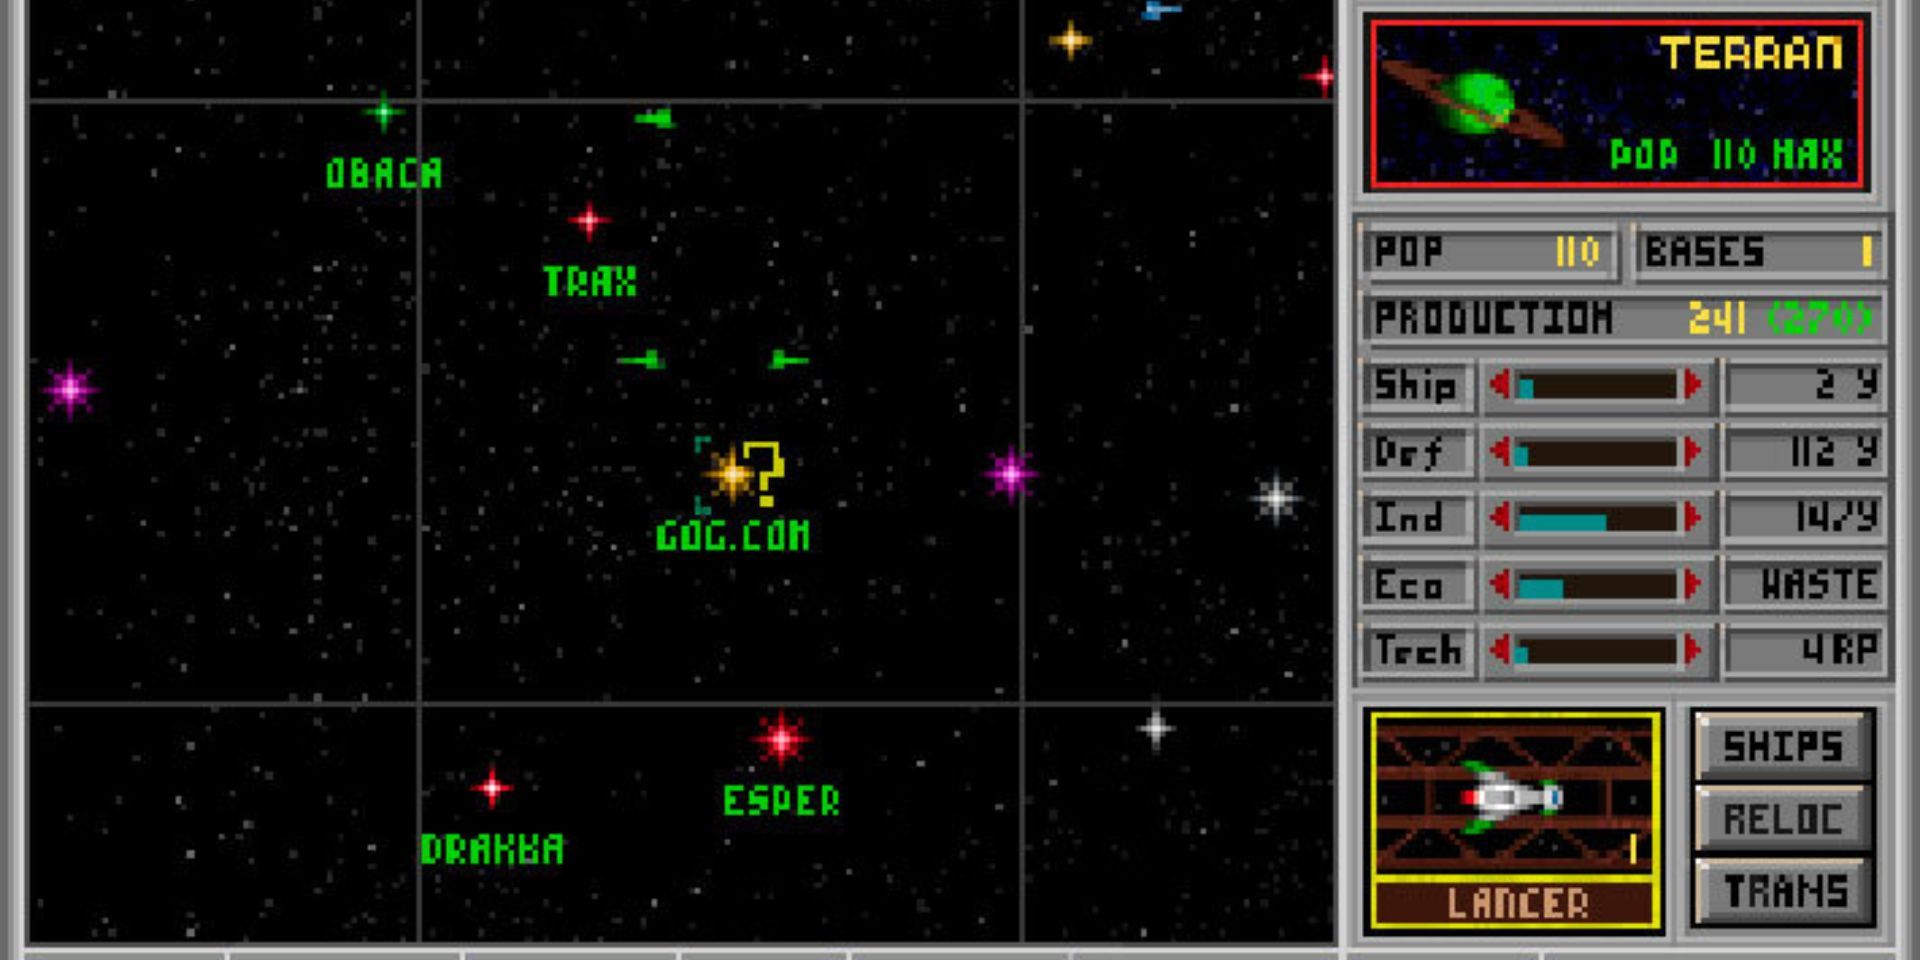 a screenshot from Master of Orion